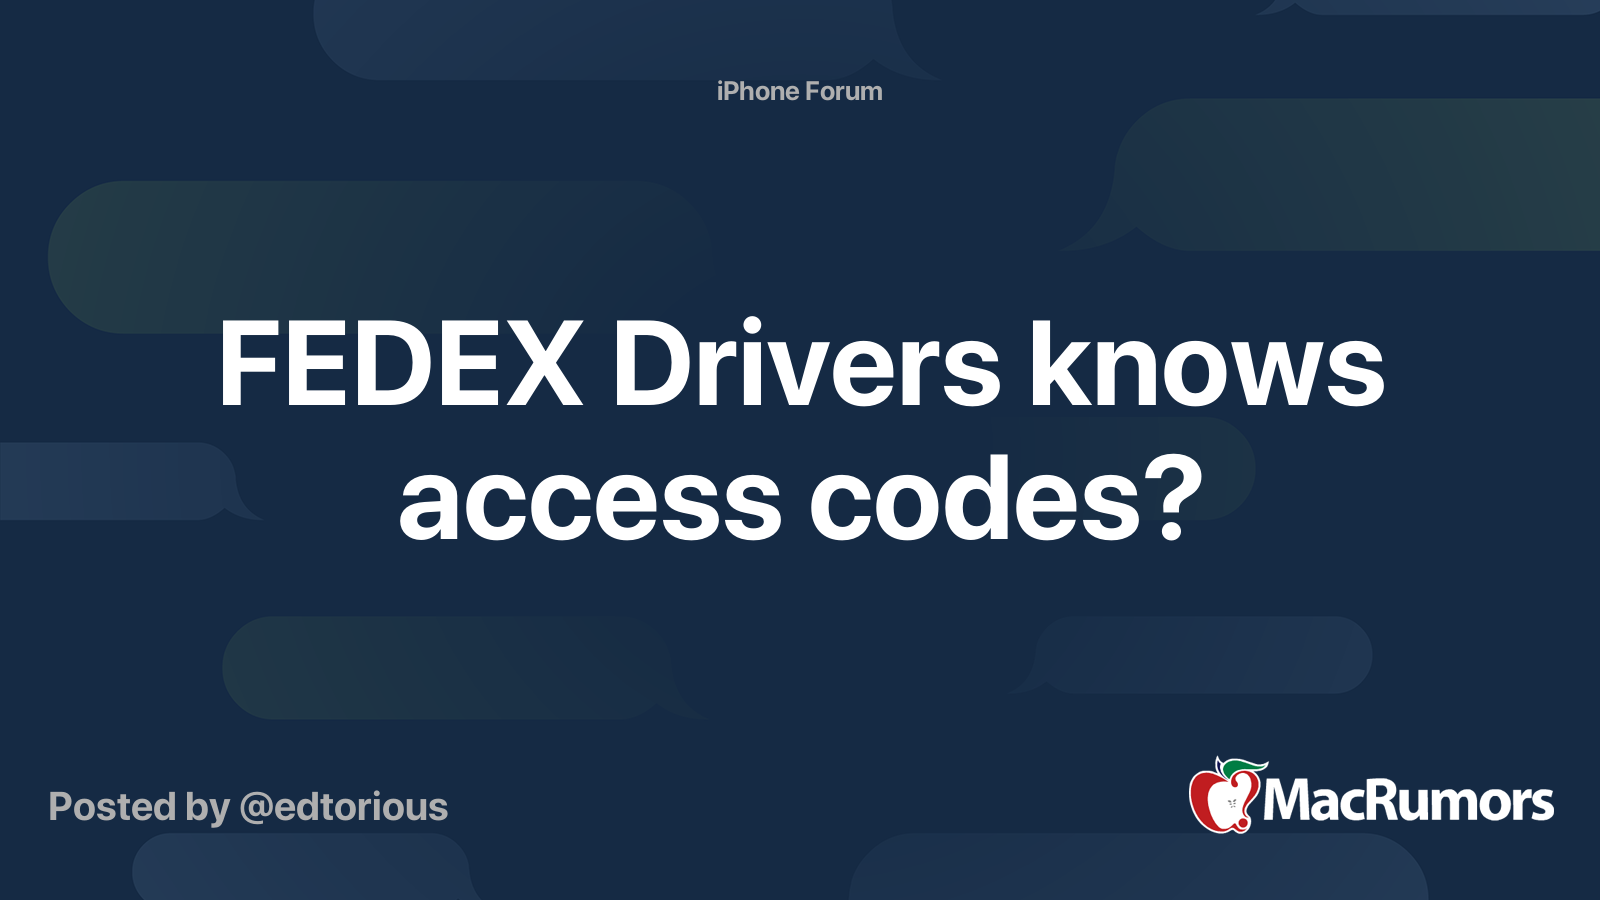 FEDEX Drivers knows access codes? | MacRumors Forums